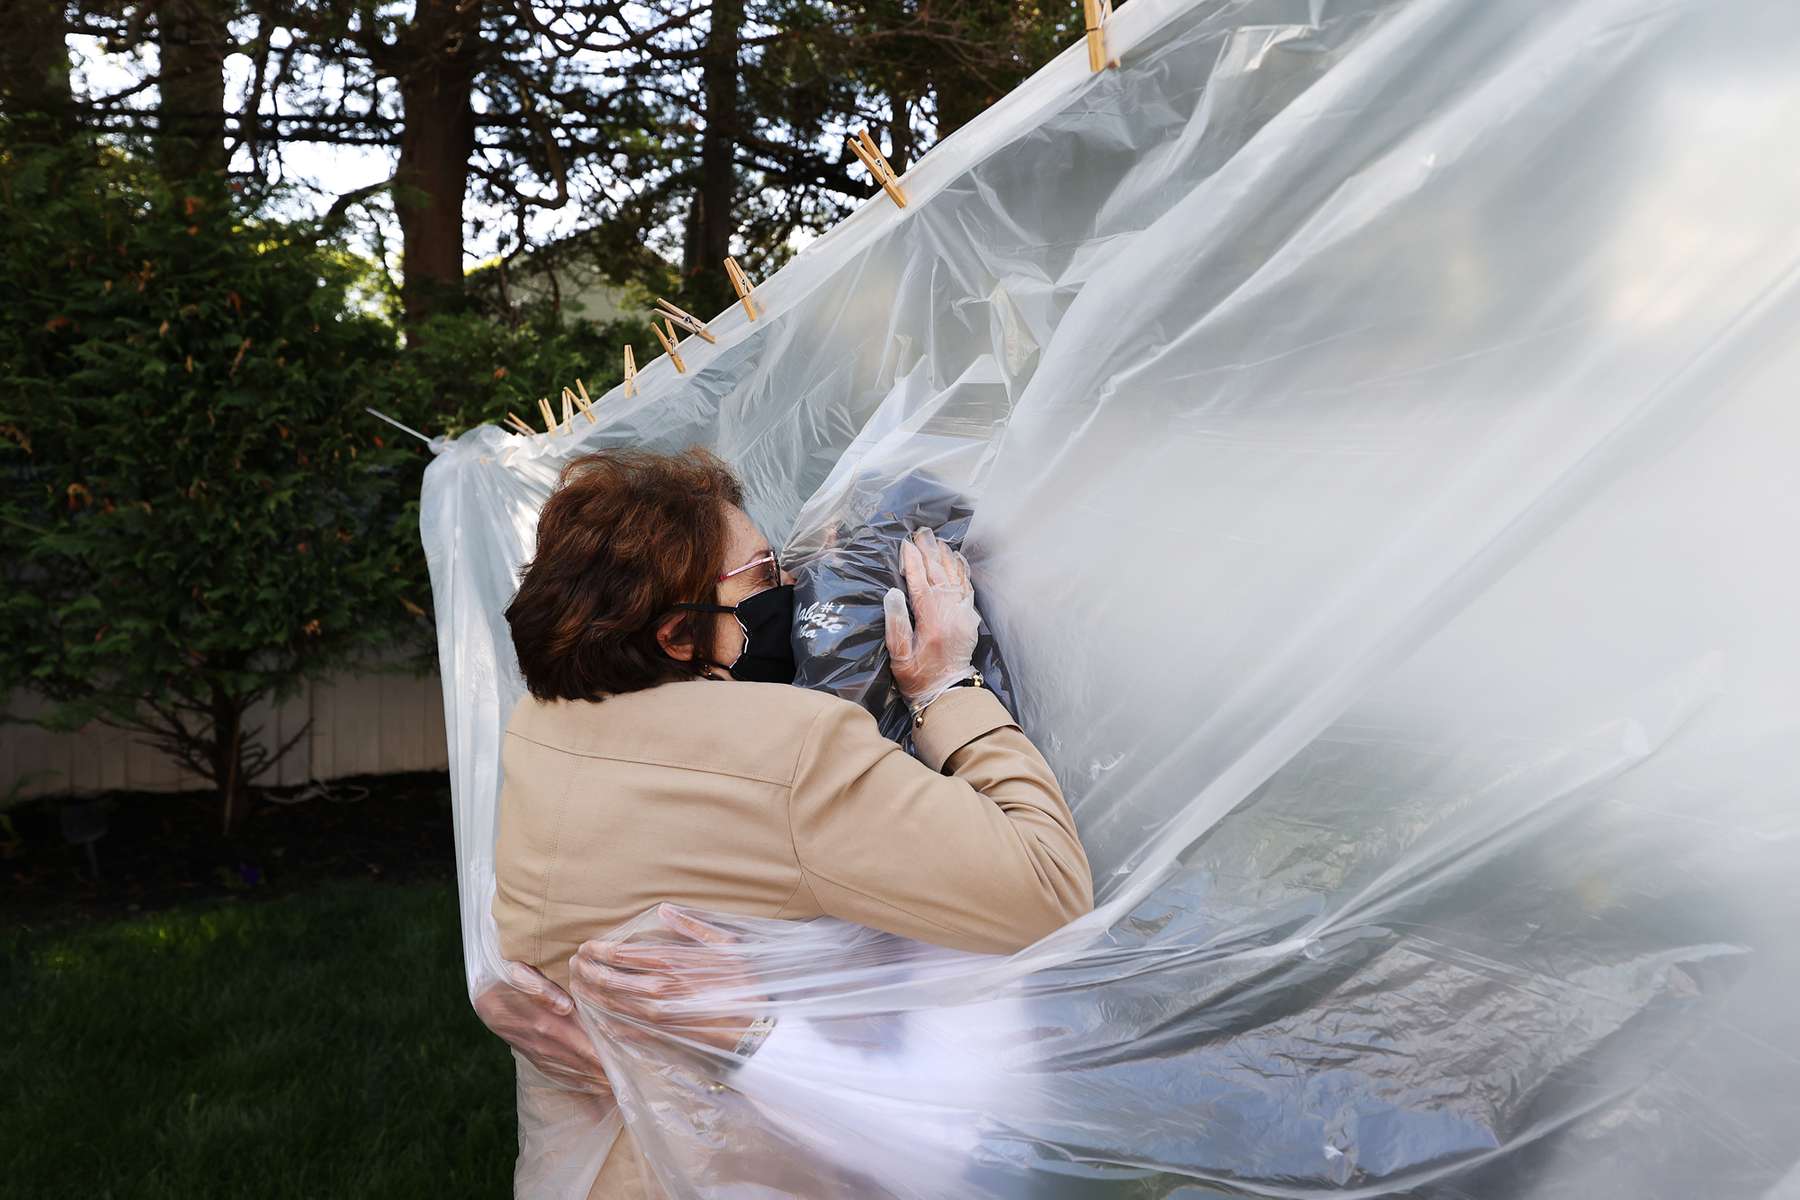 Michelle Grant hugs her Mother Mary Grace Sileo through a plastic drop cloth hung up on a homemade clothes line during Memorial Day Weekend on May 24, 2020 in Wantagh, New York.  It is the first time they have had physical contact of any kind since the coronavirus COVID-19 pandemic lockdown started in late February.  